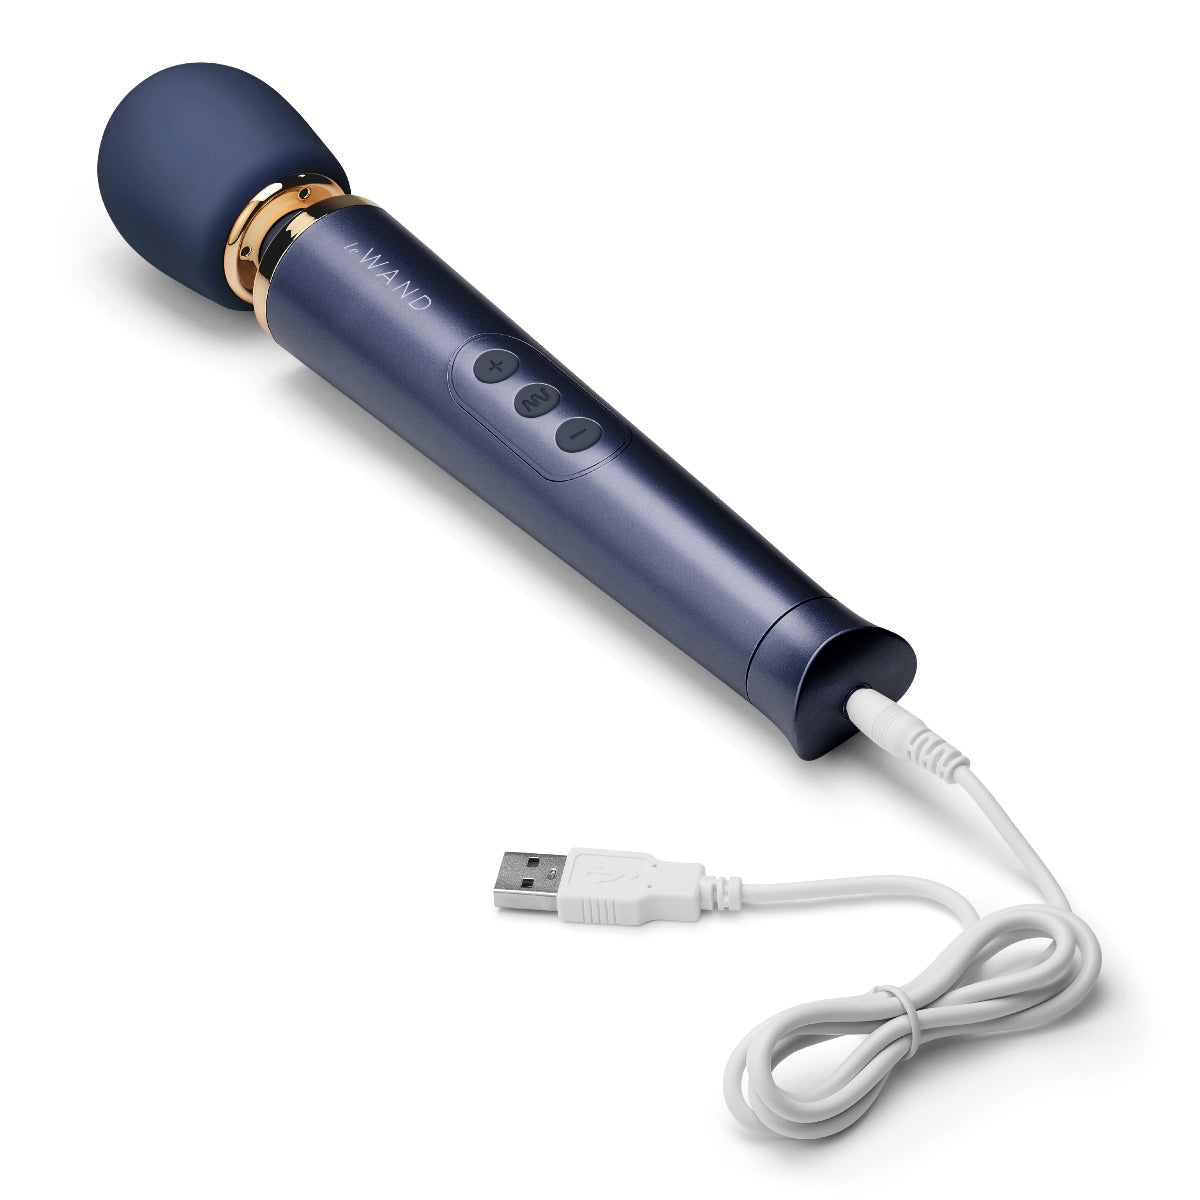 Le Wand Petite Rechargeable Wand Massager Navy Blue